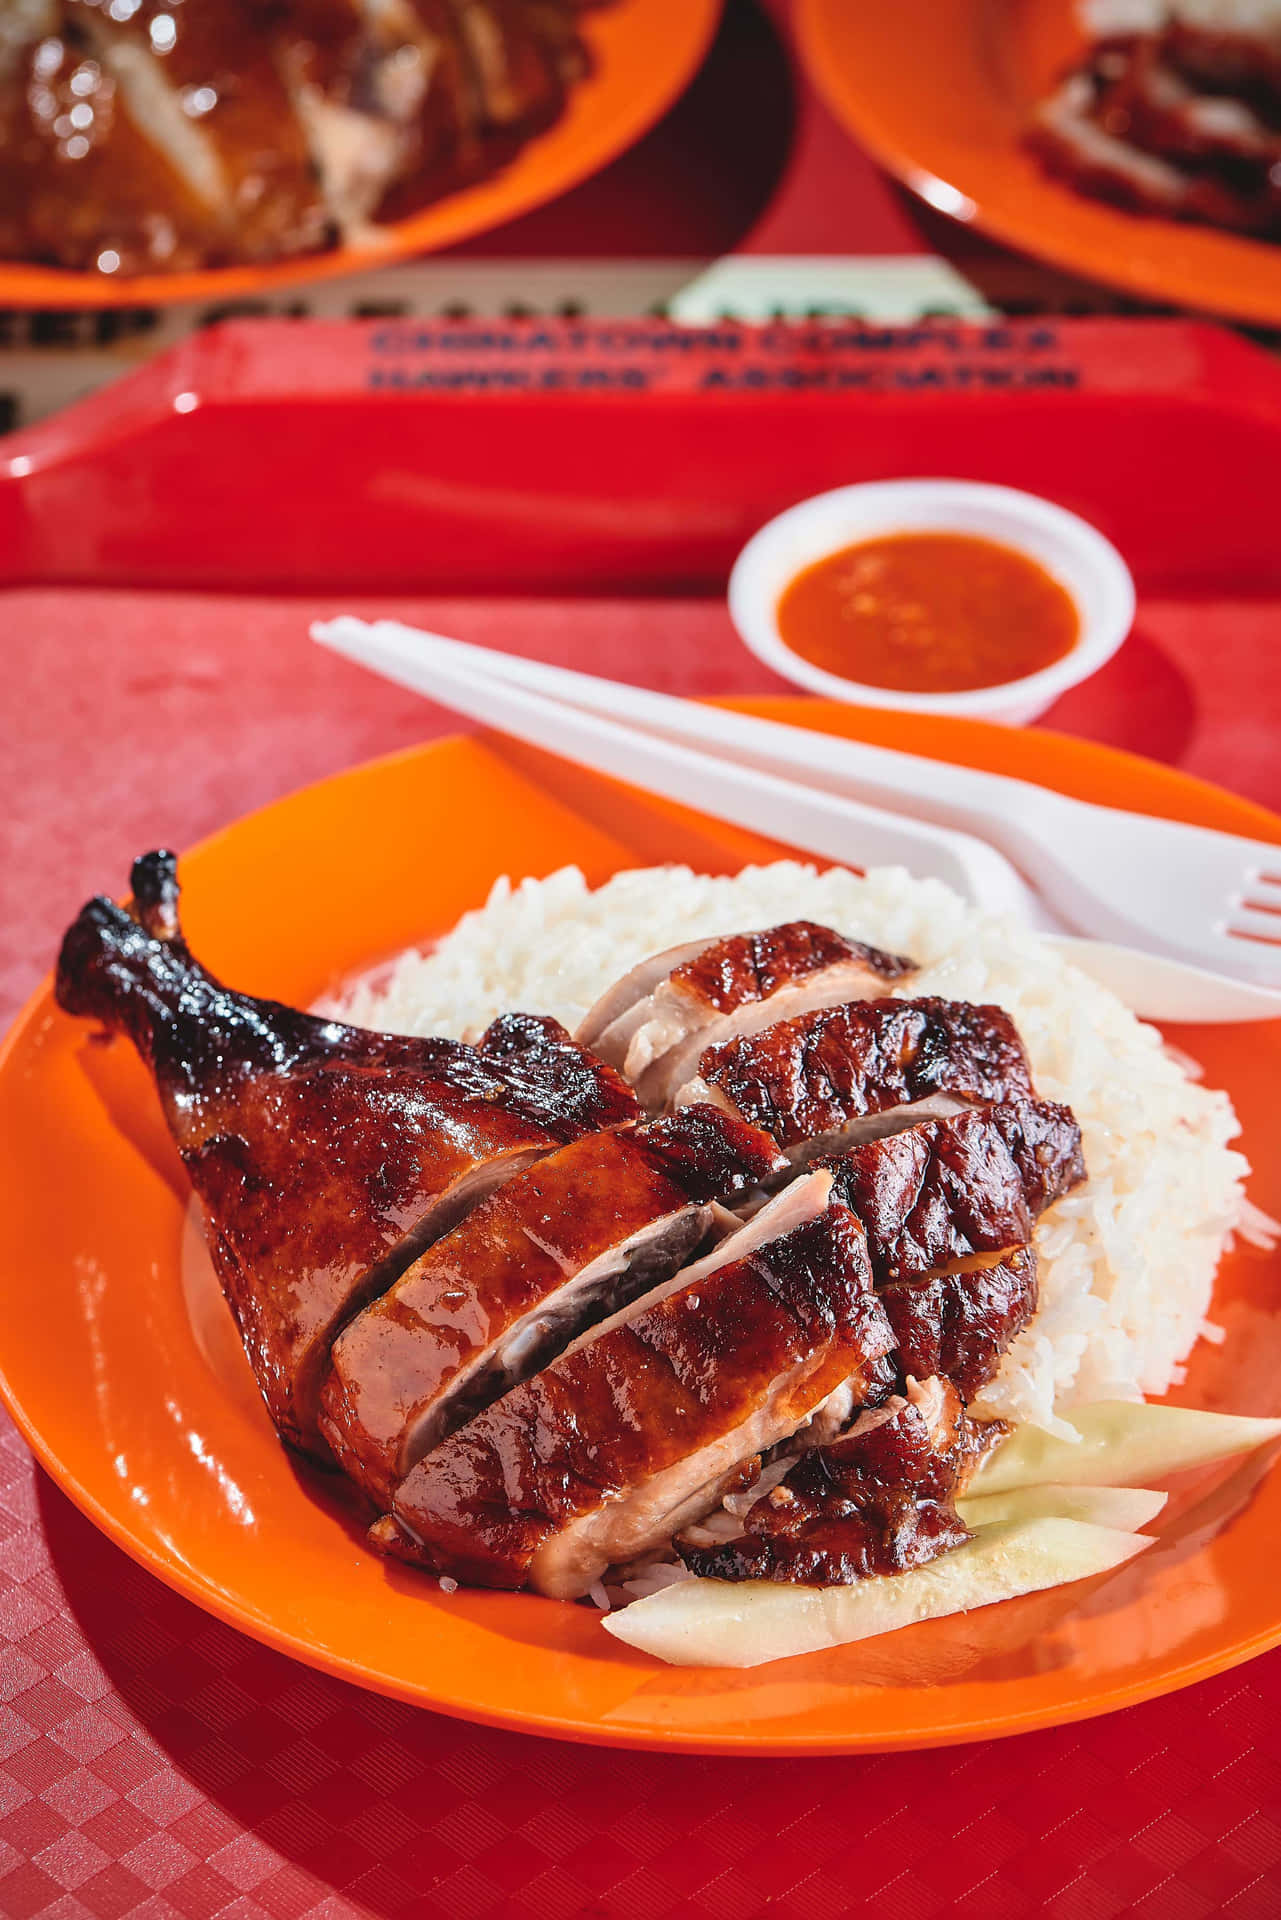 Duck Rice At Chinatown Complex Food Centre Wallpaper